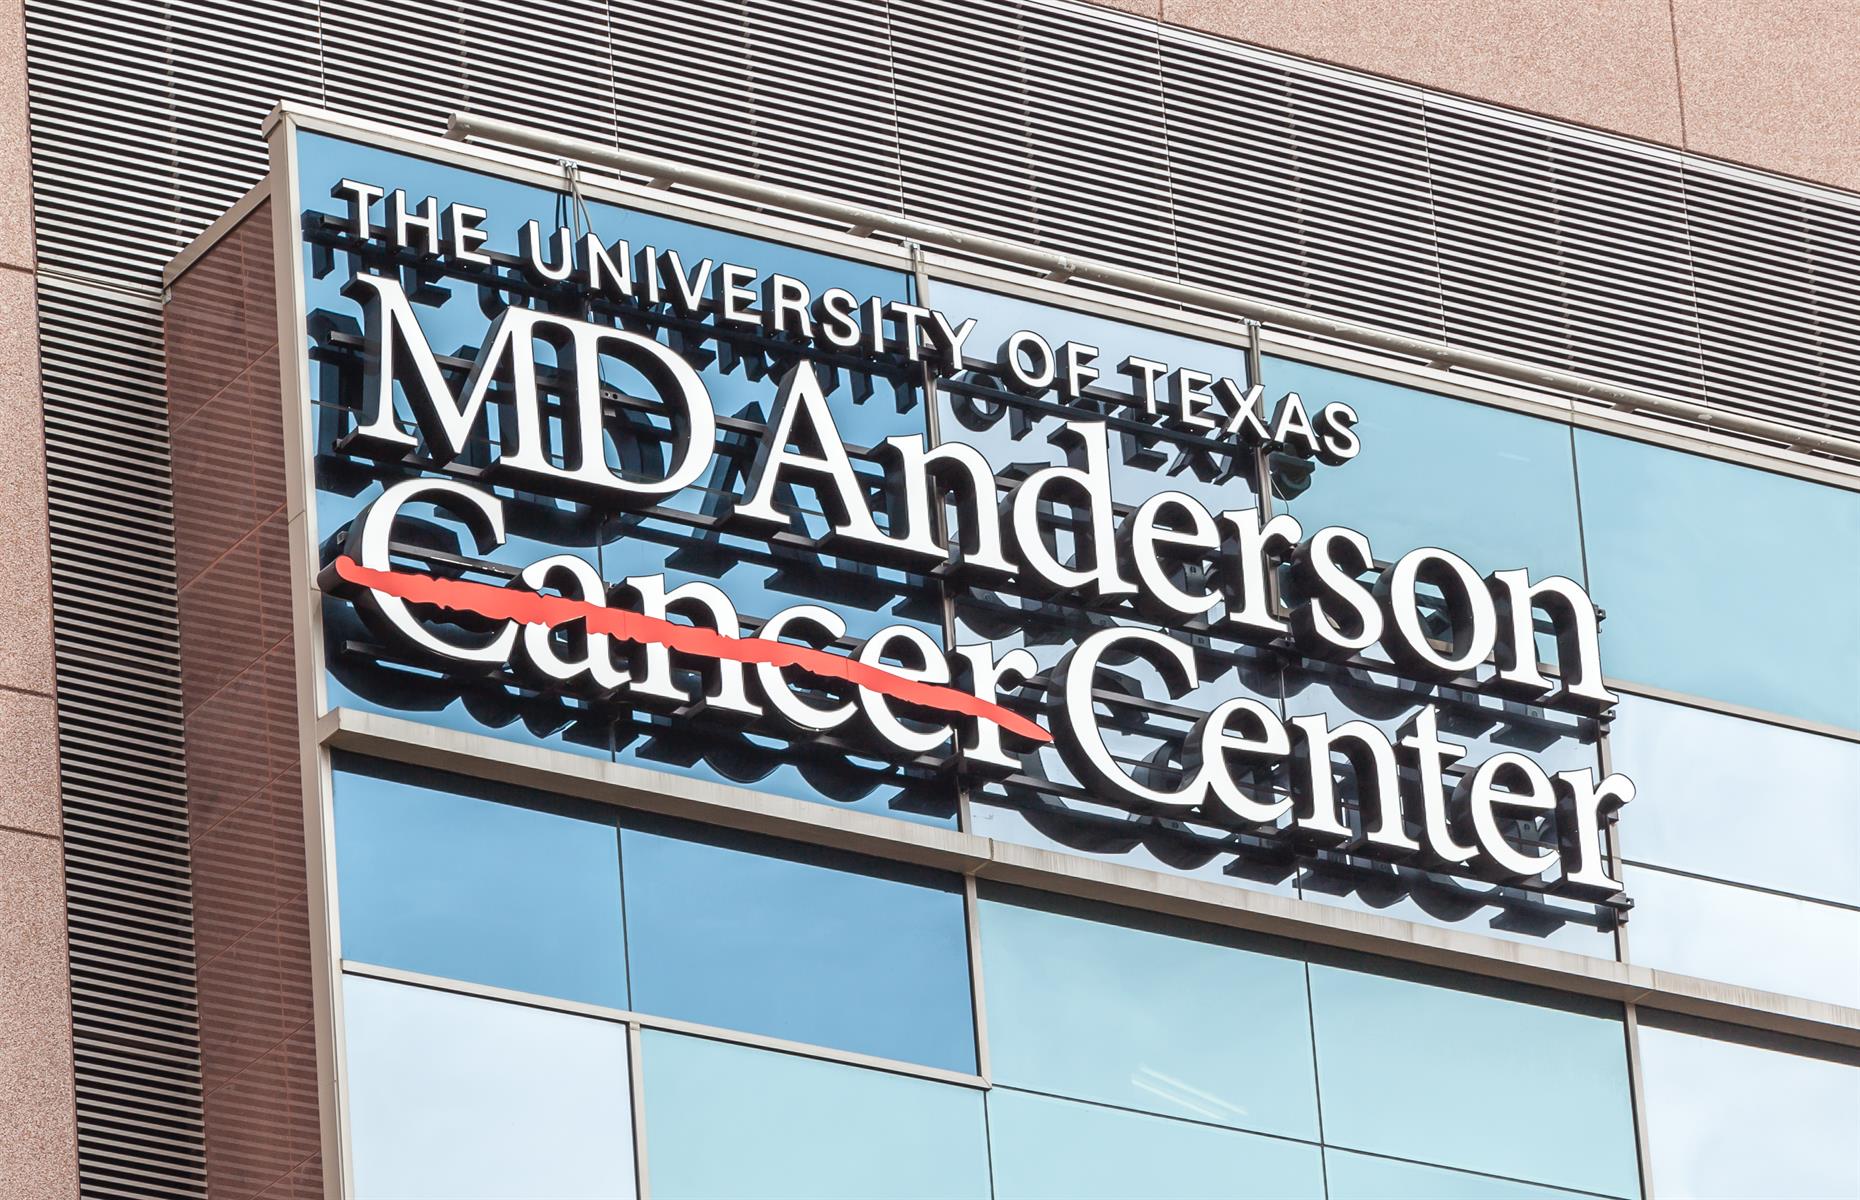 19. MD Anderson Cancer Center